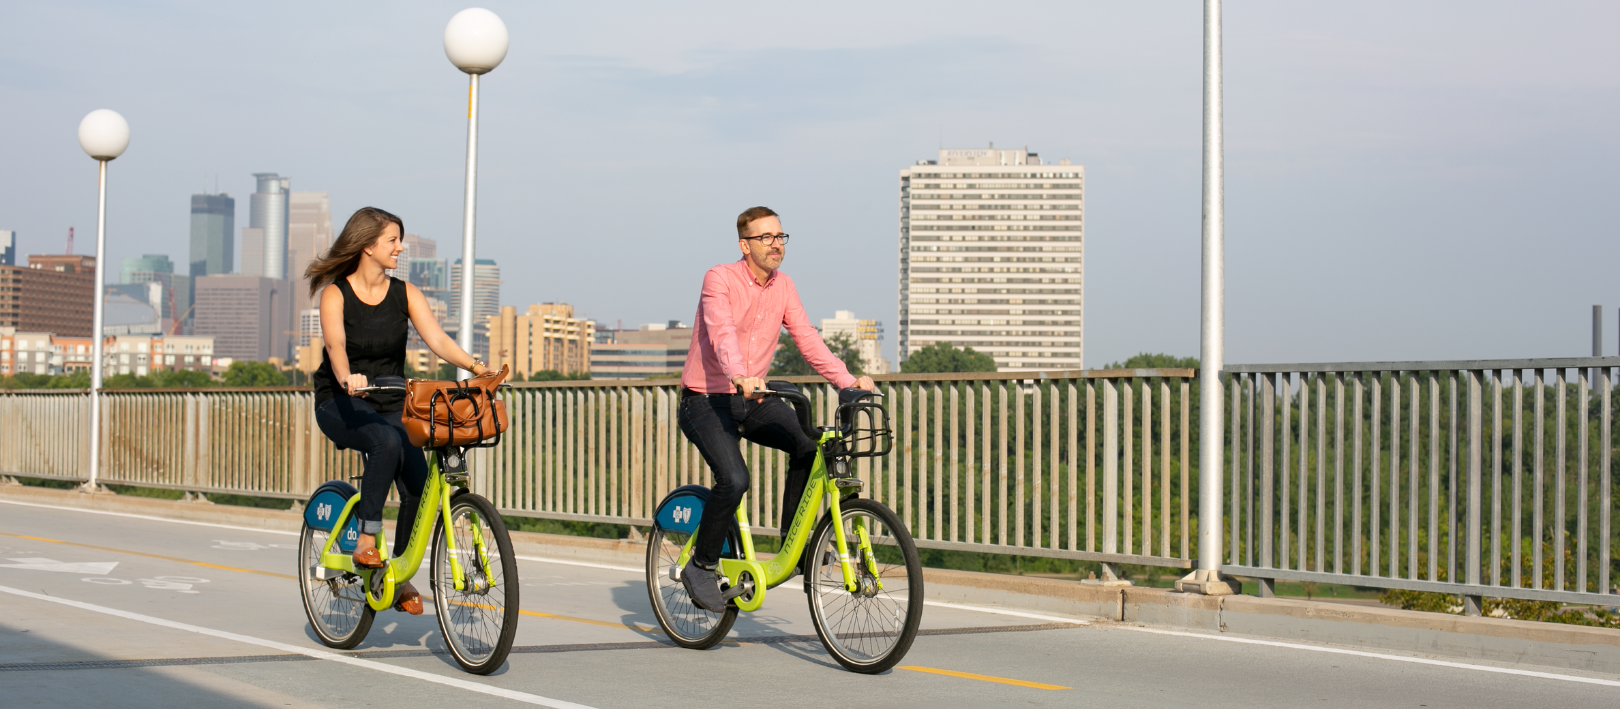 two people on bikes on a bridge with downtown in the background